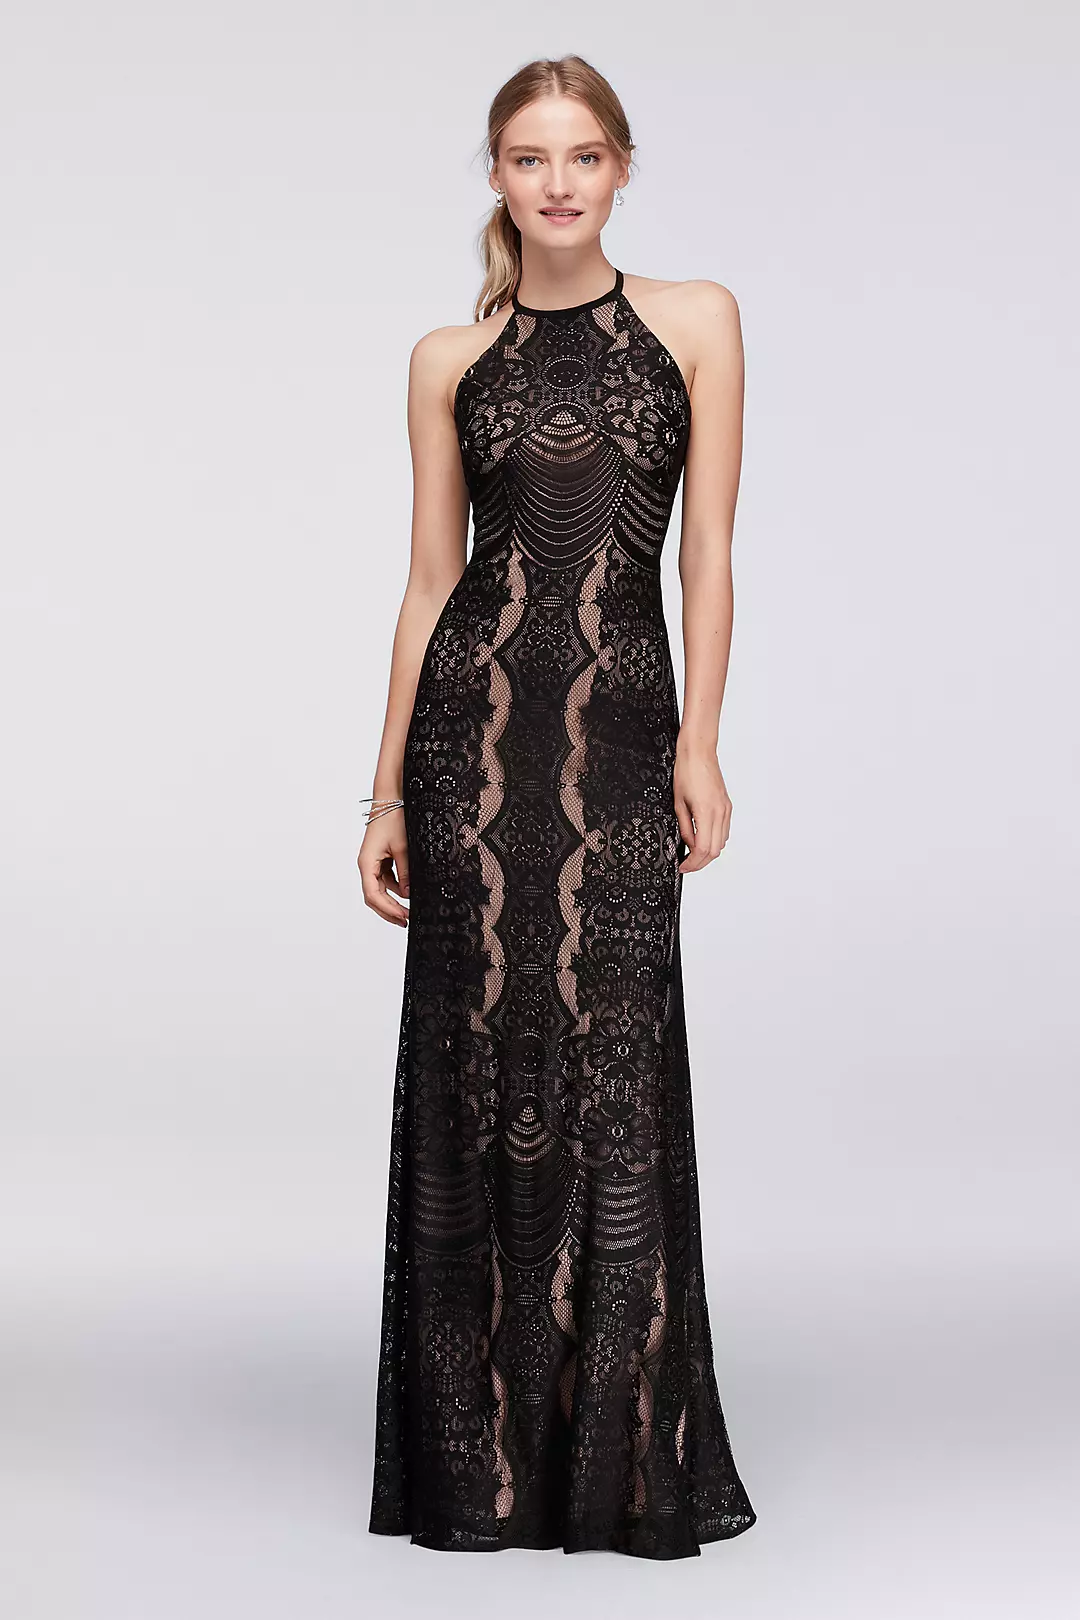 Graphic Lace Halter Dress with Keyhole Back Image